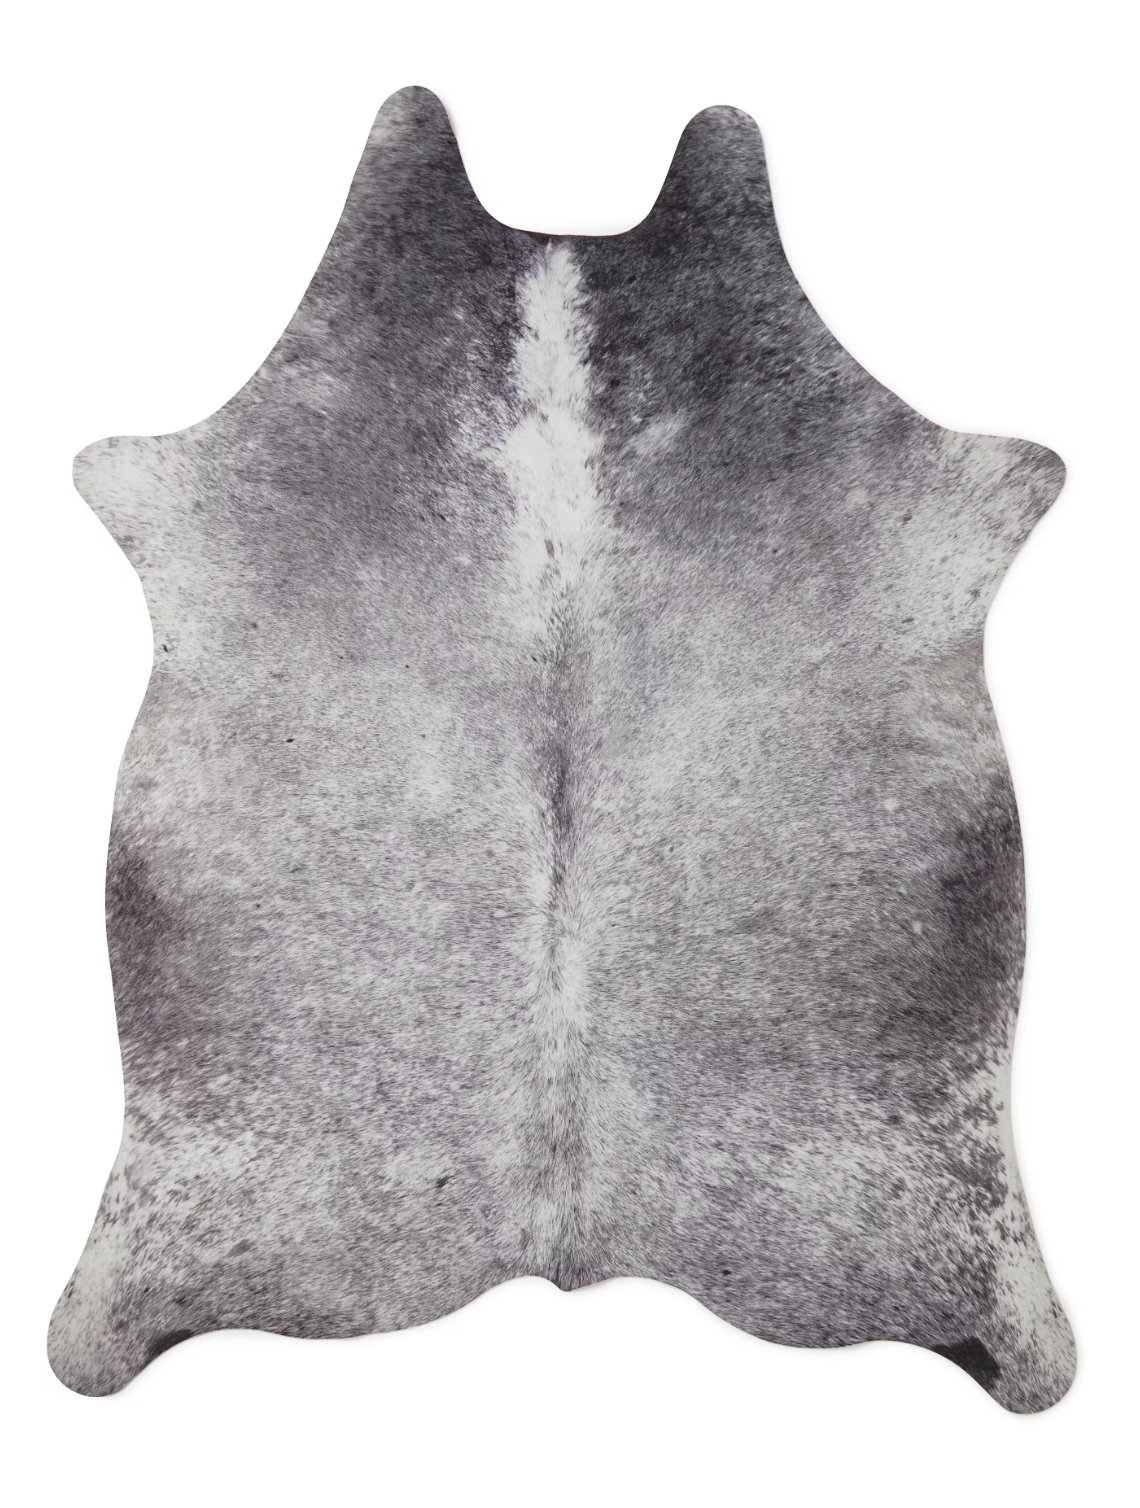 Imitation cow hide in grey & white